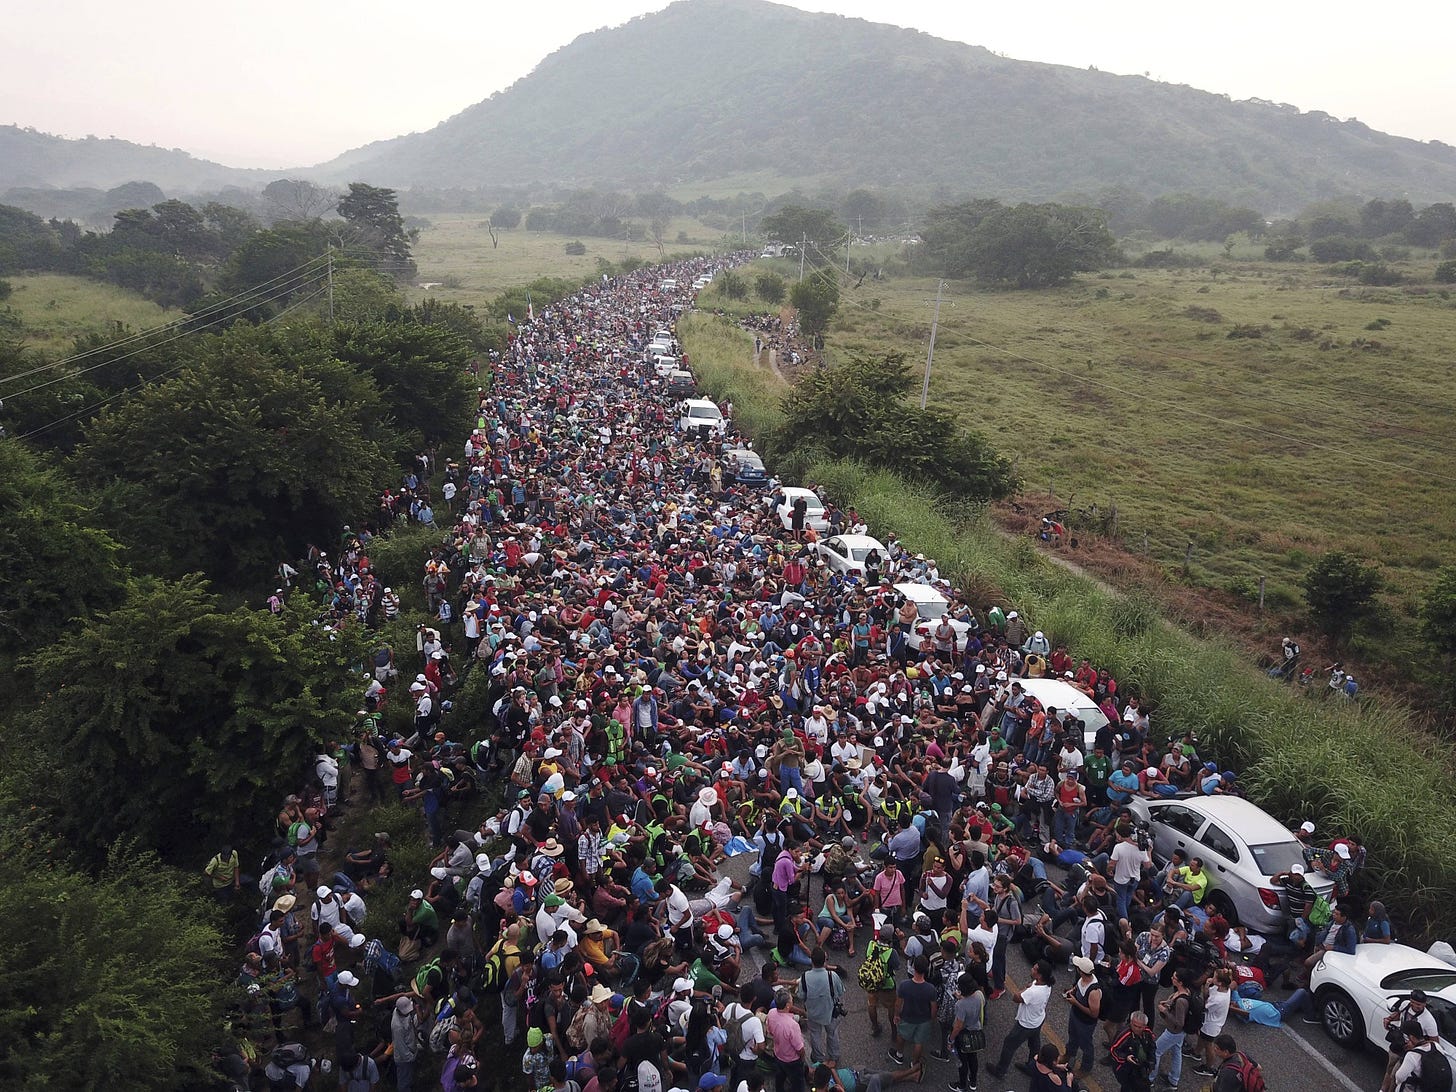 The US Border Crisis Is Just The Tip Of An International Problem